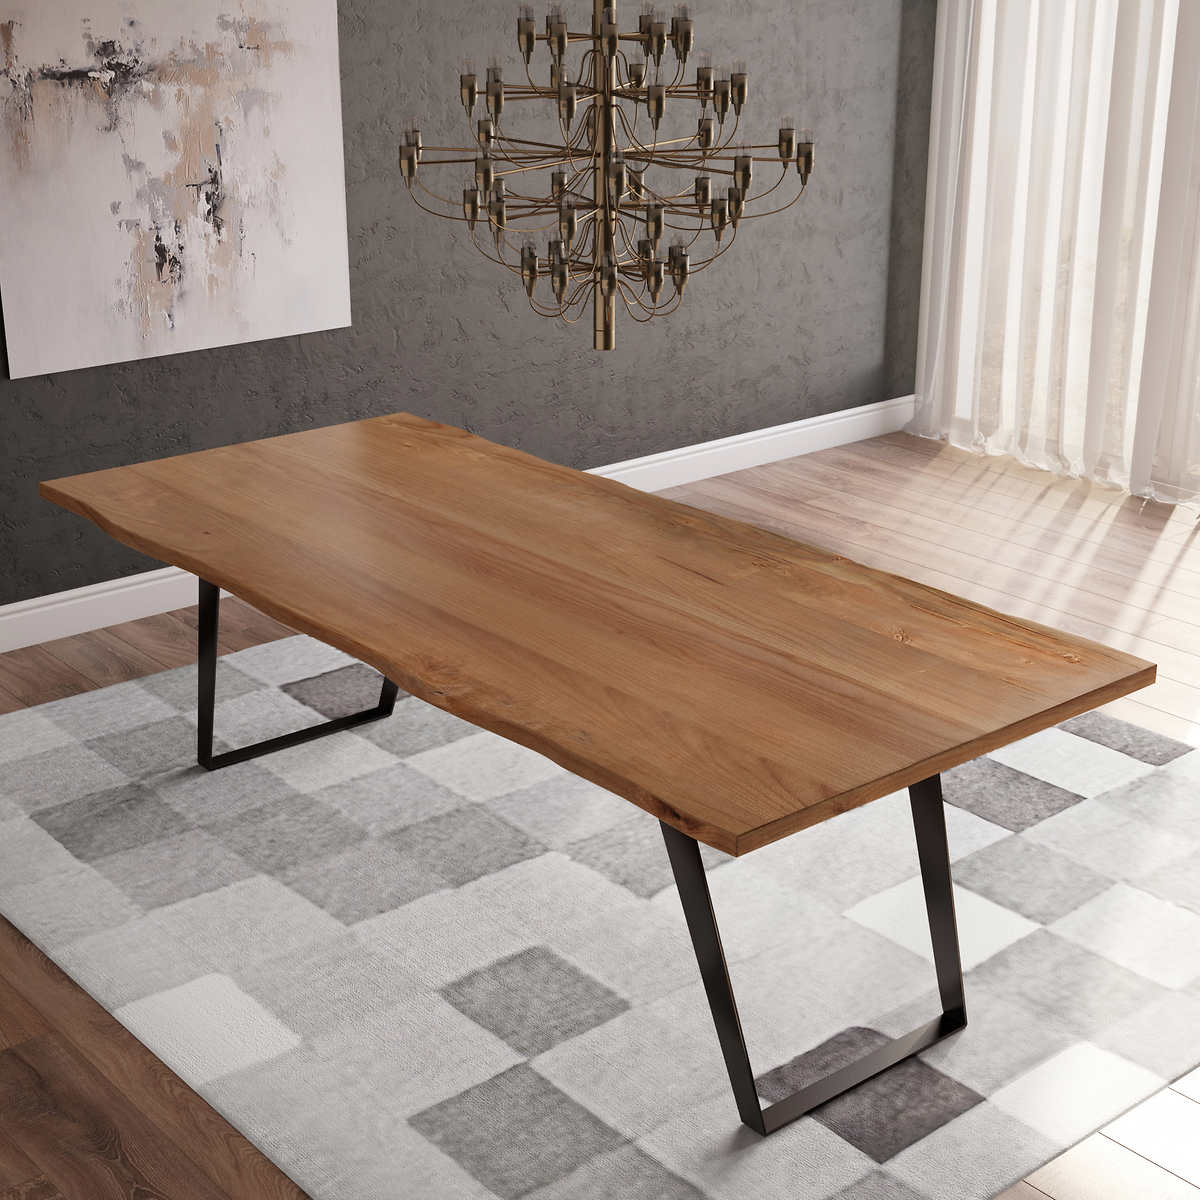 Banff Natural Acacia Live Edge 249 Cm 98 In Dining Table Costco